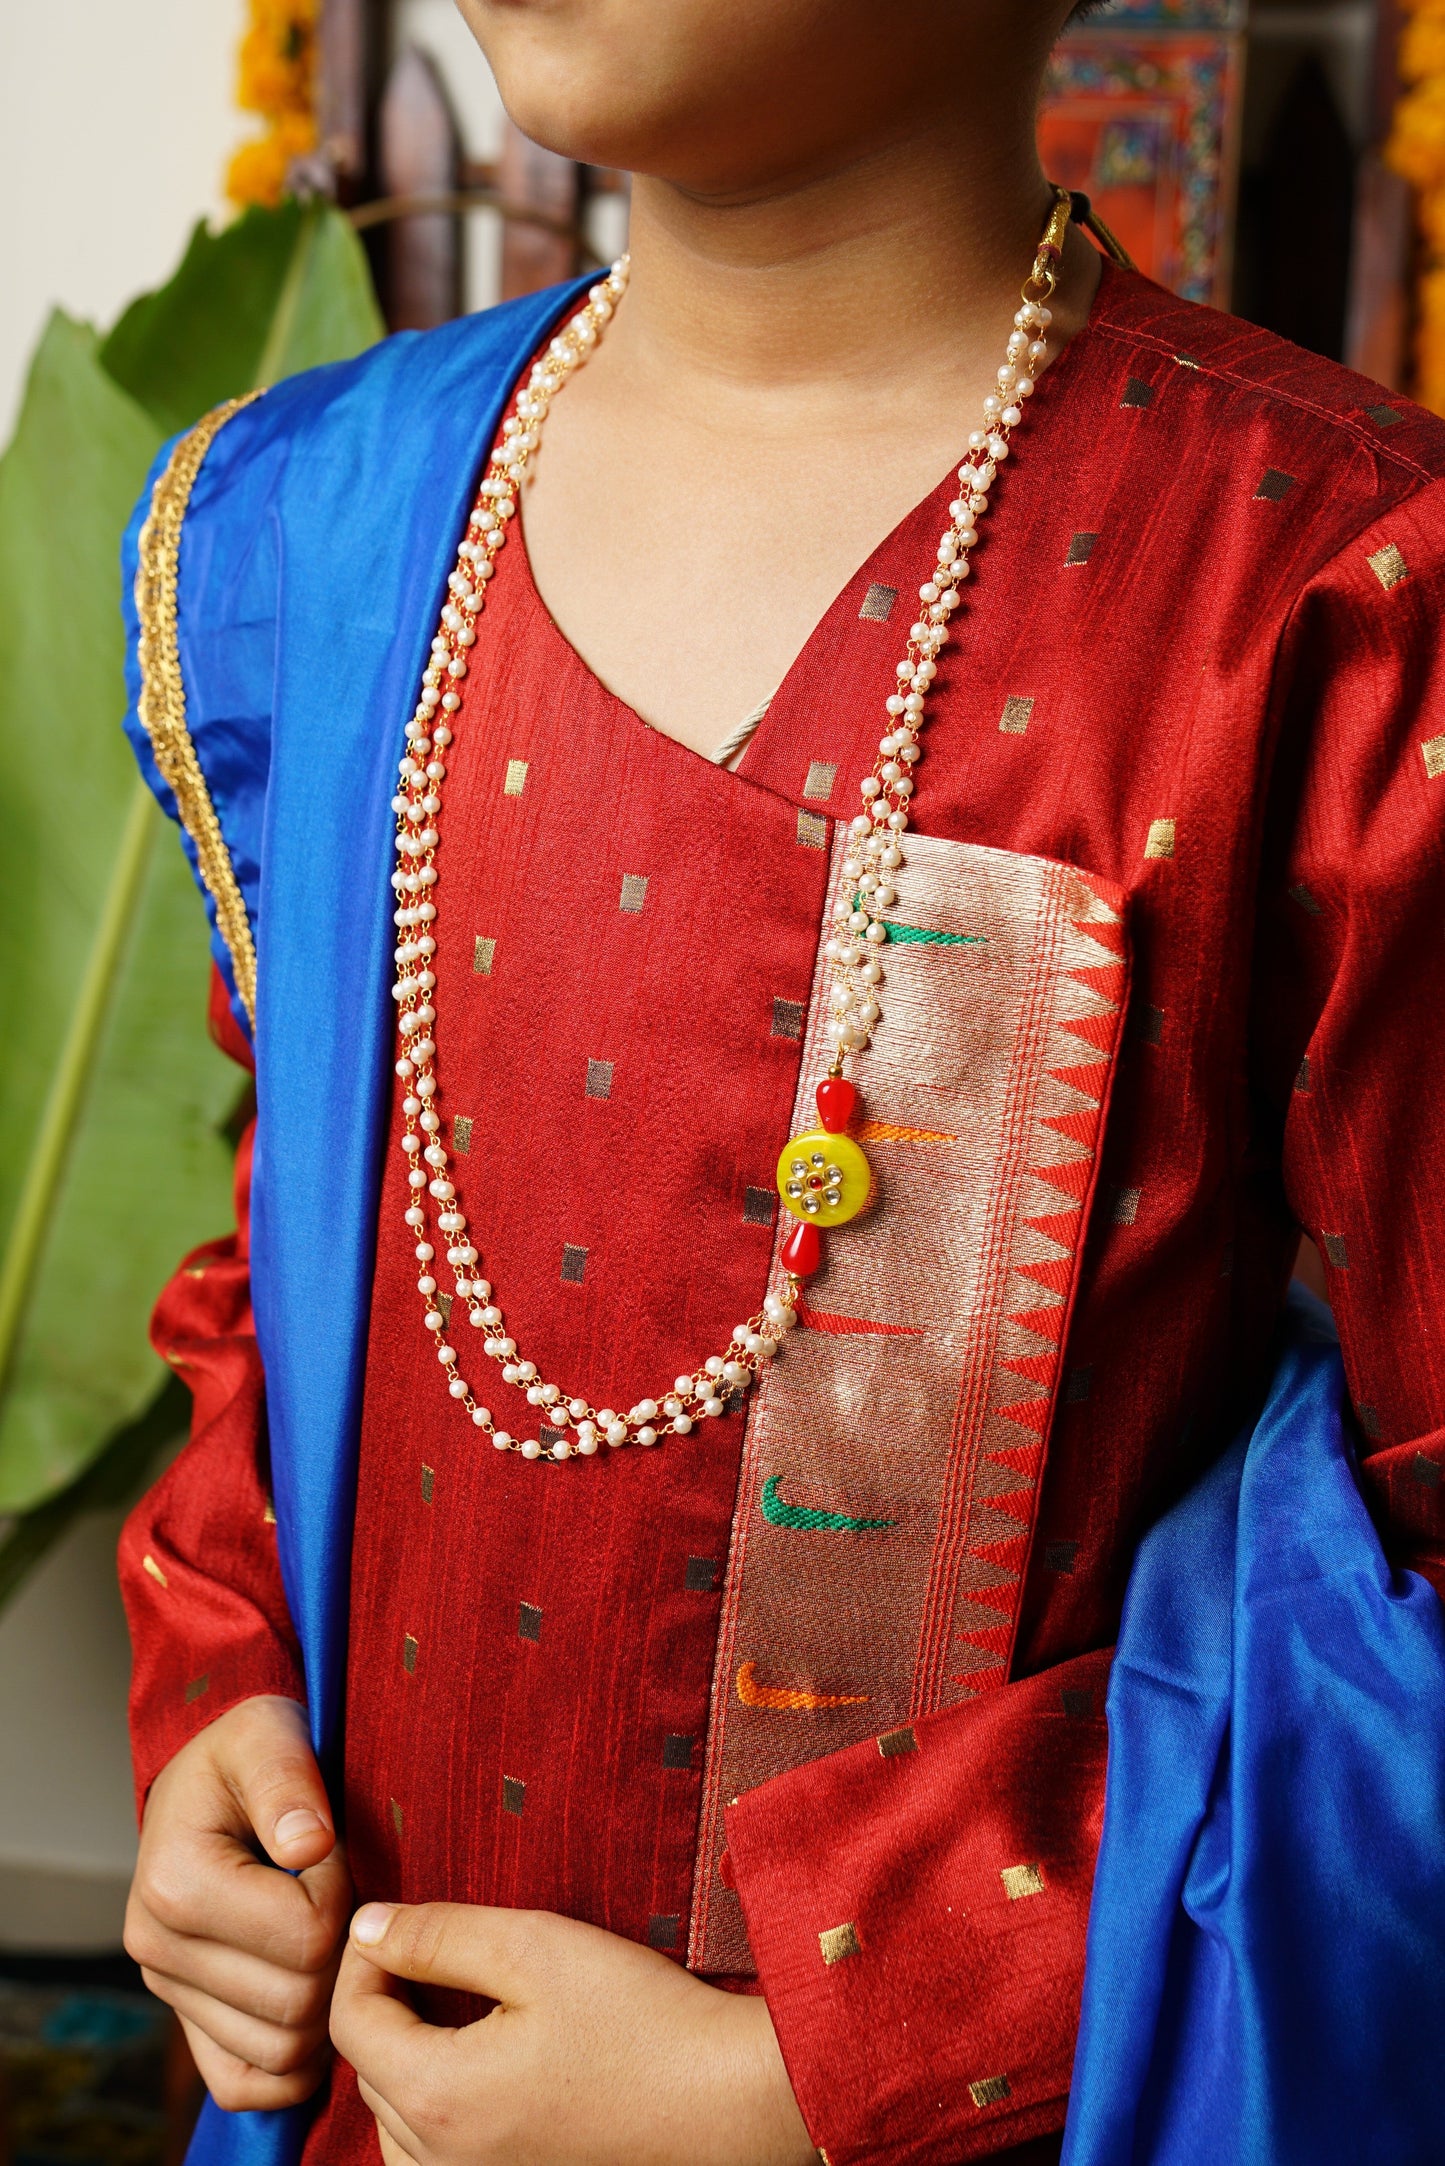 Deep red colored bhagalpuri silk with jari butta Round neck Kurta.Kurtas with collar or Angarakha pattern teamed with salwar are the best choice for any festive occasion for boys.They are Trendy, Easy to wear and comfortable to carry.